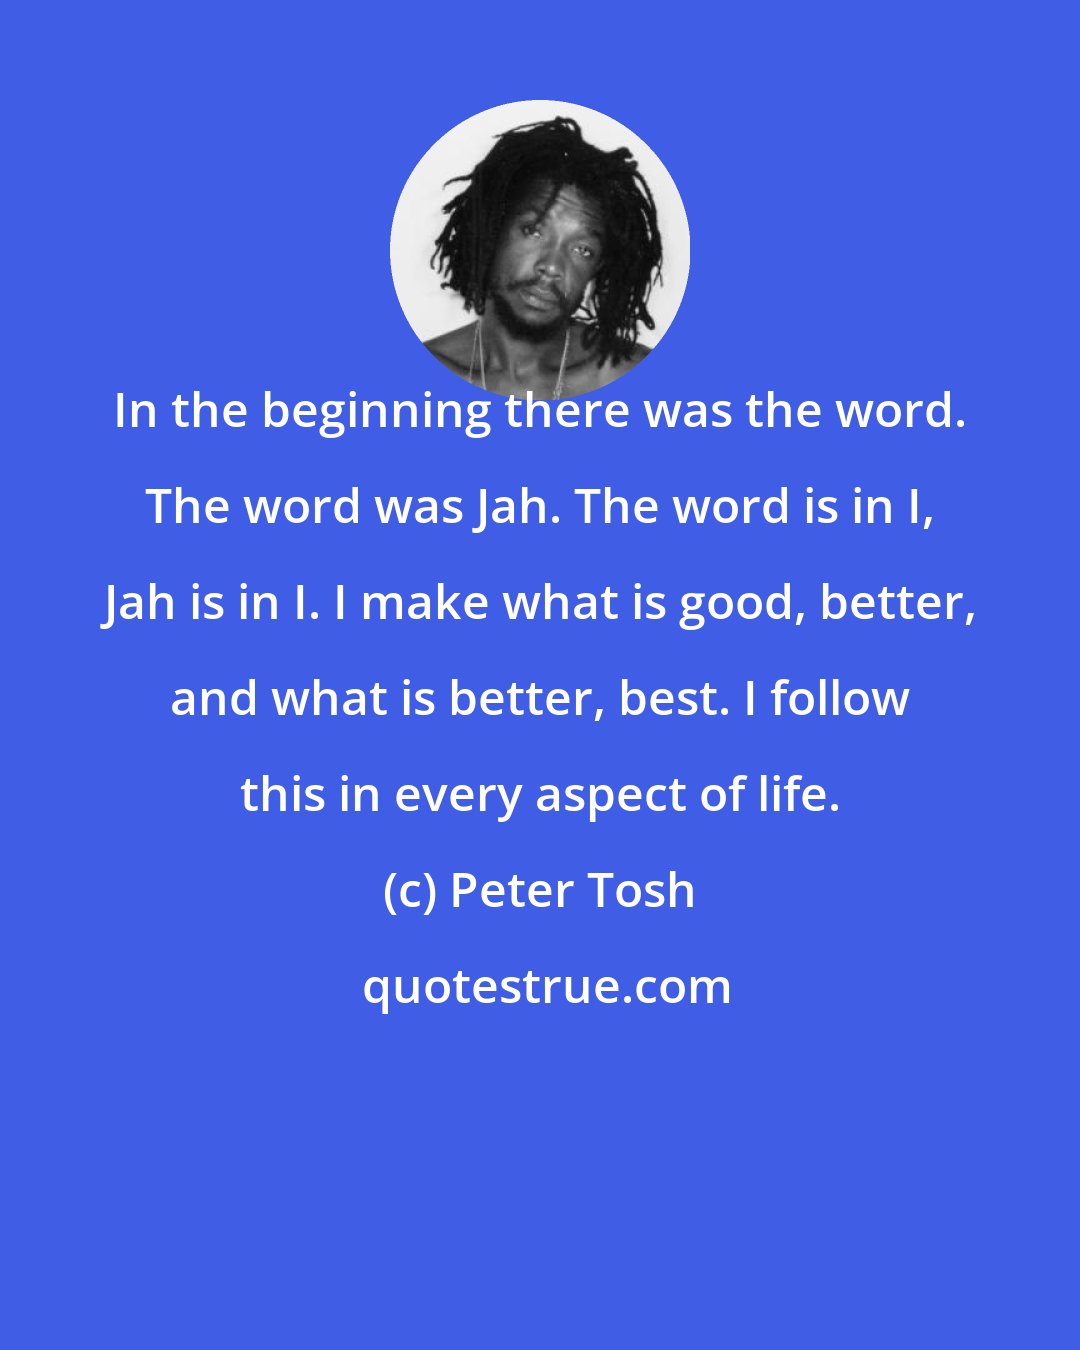 Peter Tosh: In the beginning there was the word. The word was Jah. The word is in I, Jah is in I. I make what is good, better, and what is better, best. I follow this in every aspect of life.